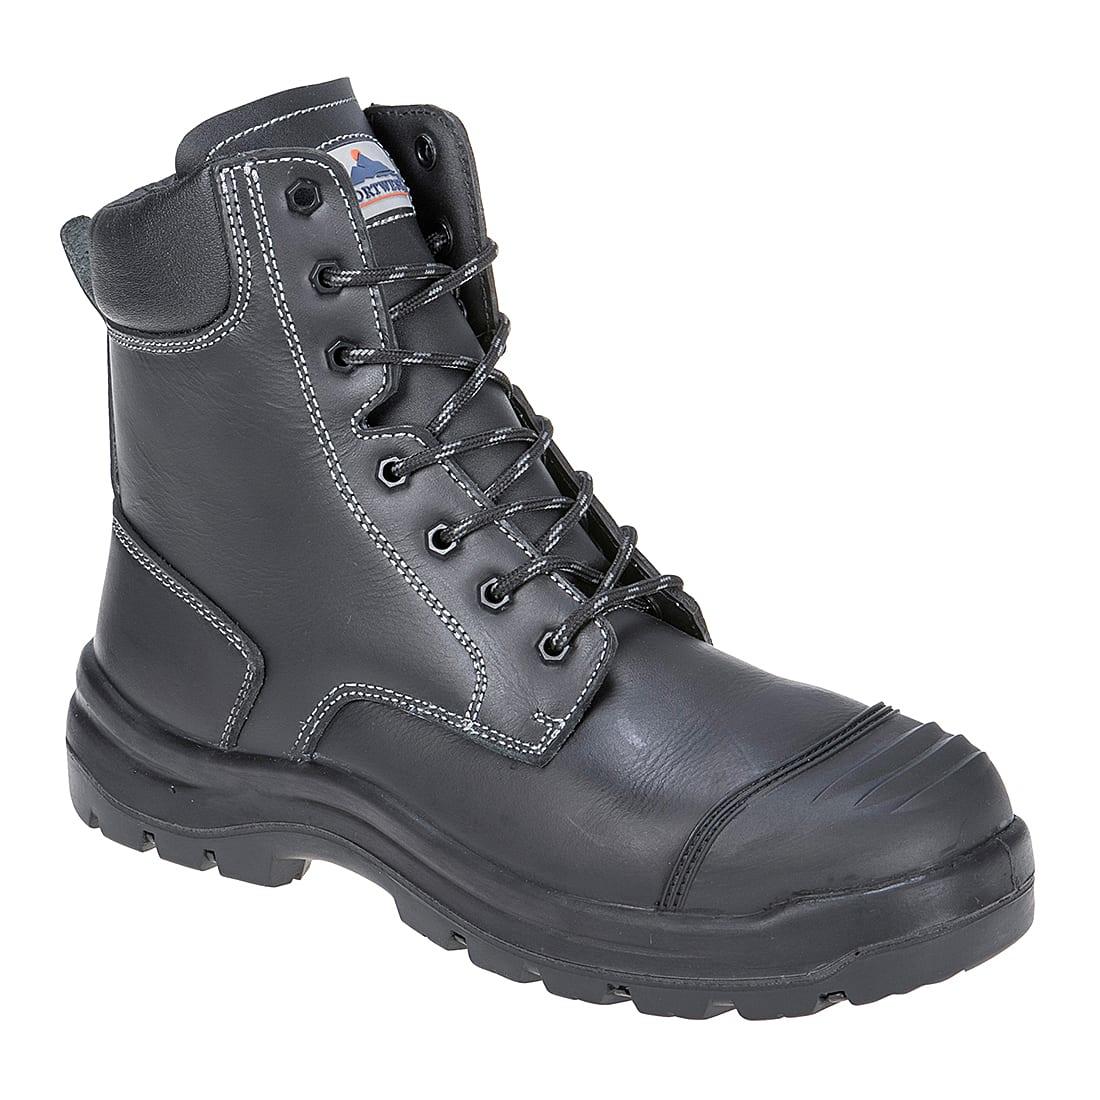 Portwest Eden Safety Boots S3 HRO CI HI FO in Black (Product Code: FD15)